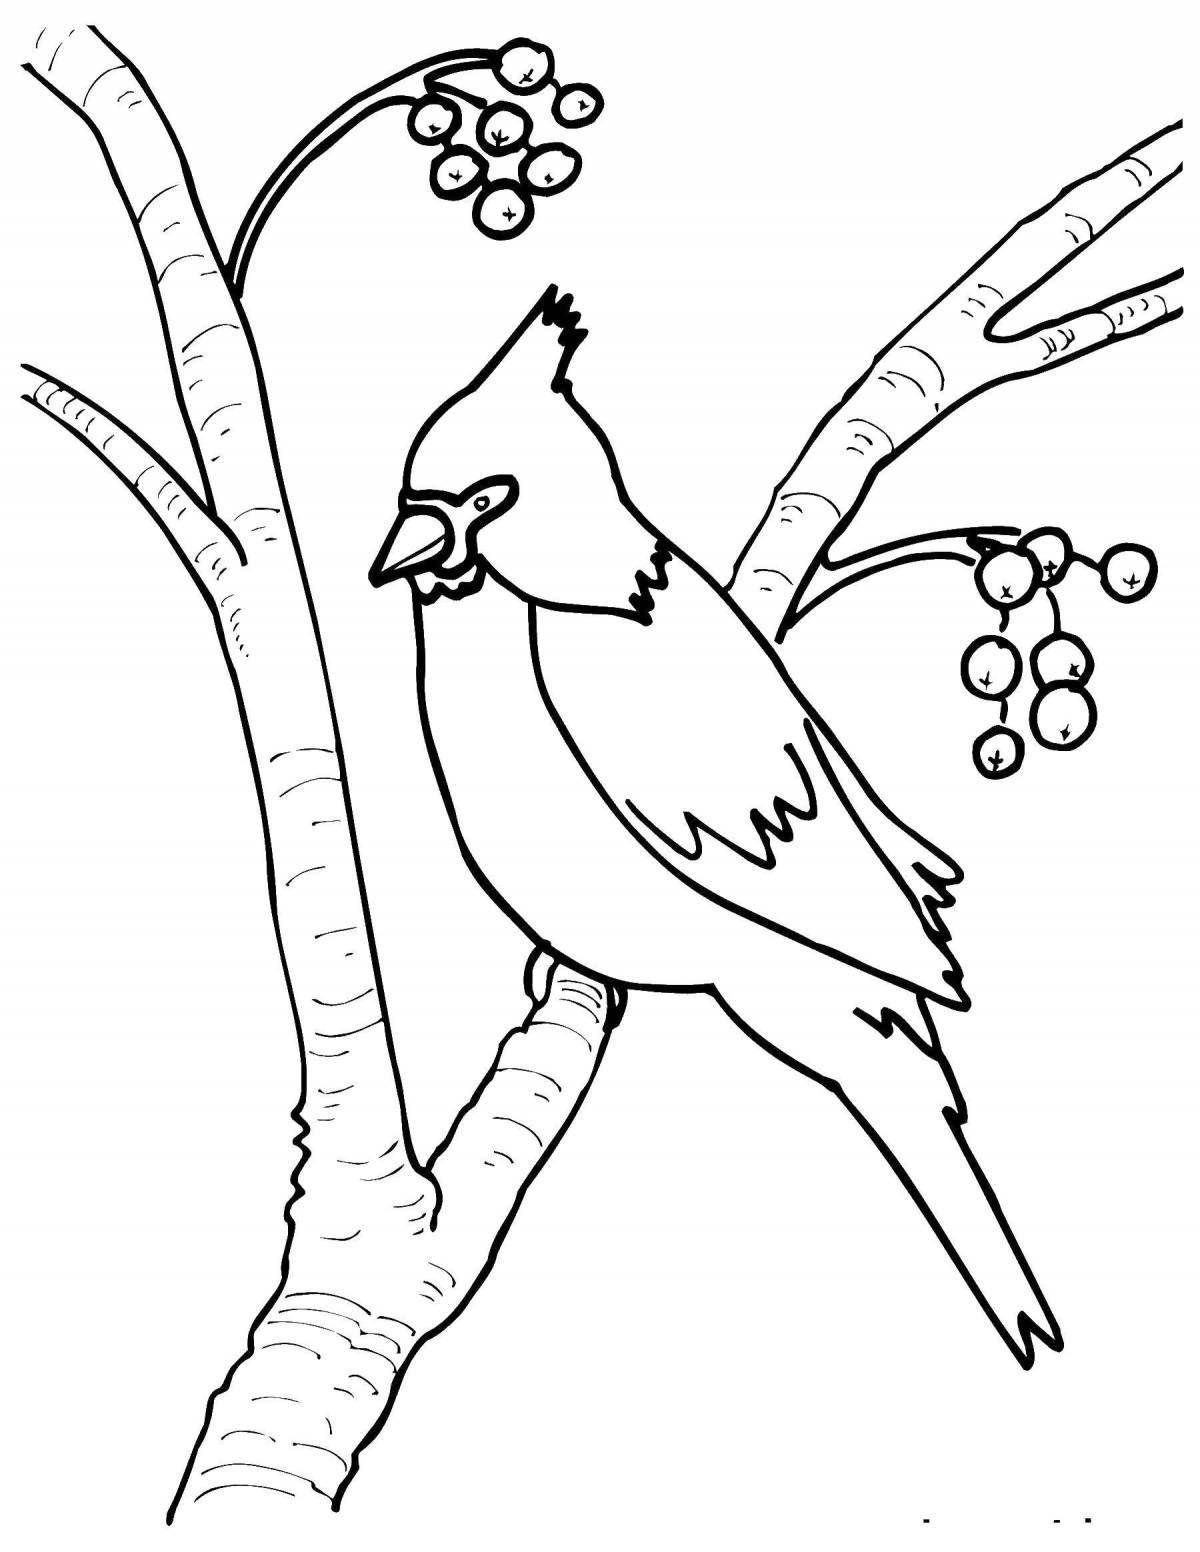 Adorable winter bird coloring book for 3-4 year olds